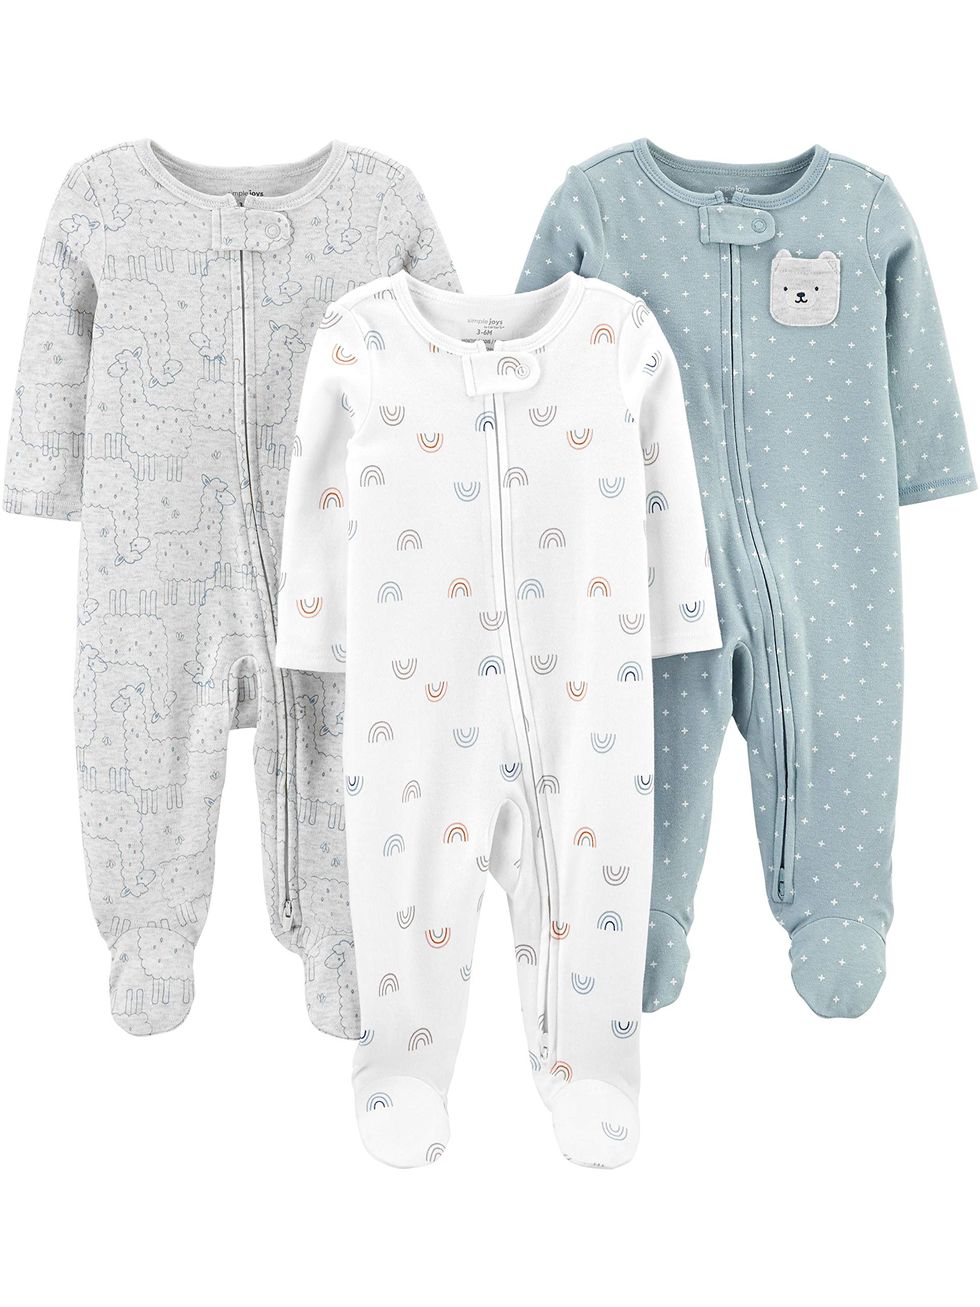 Unisex Babies' Cotton Footed Sleep and Play